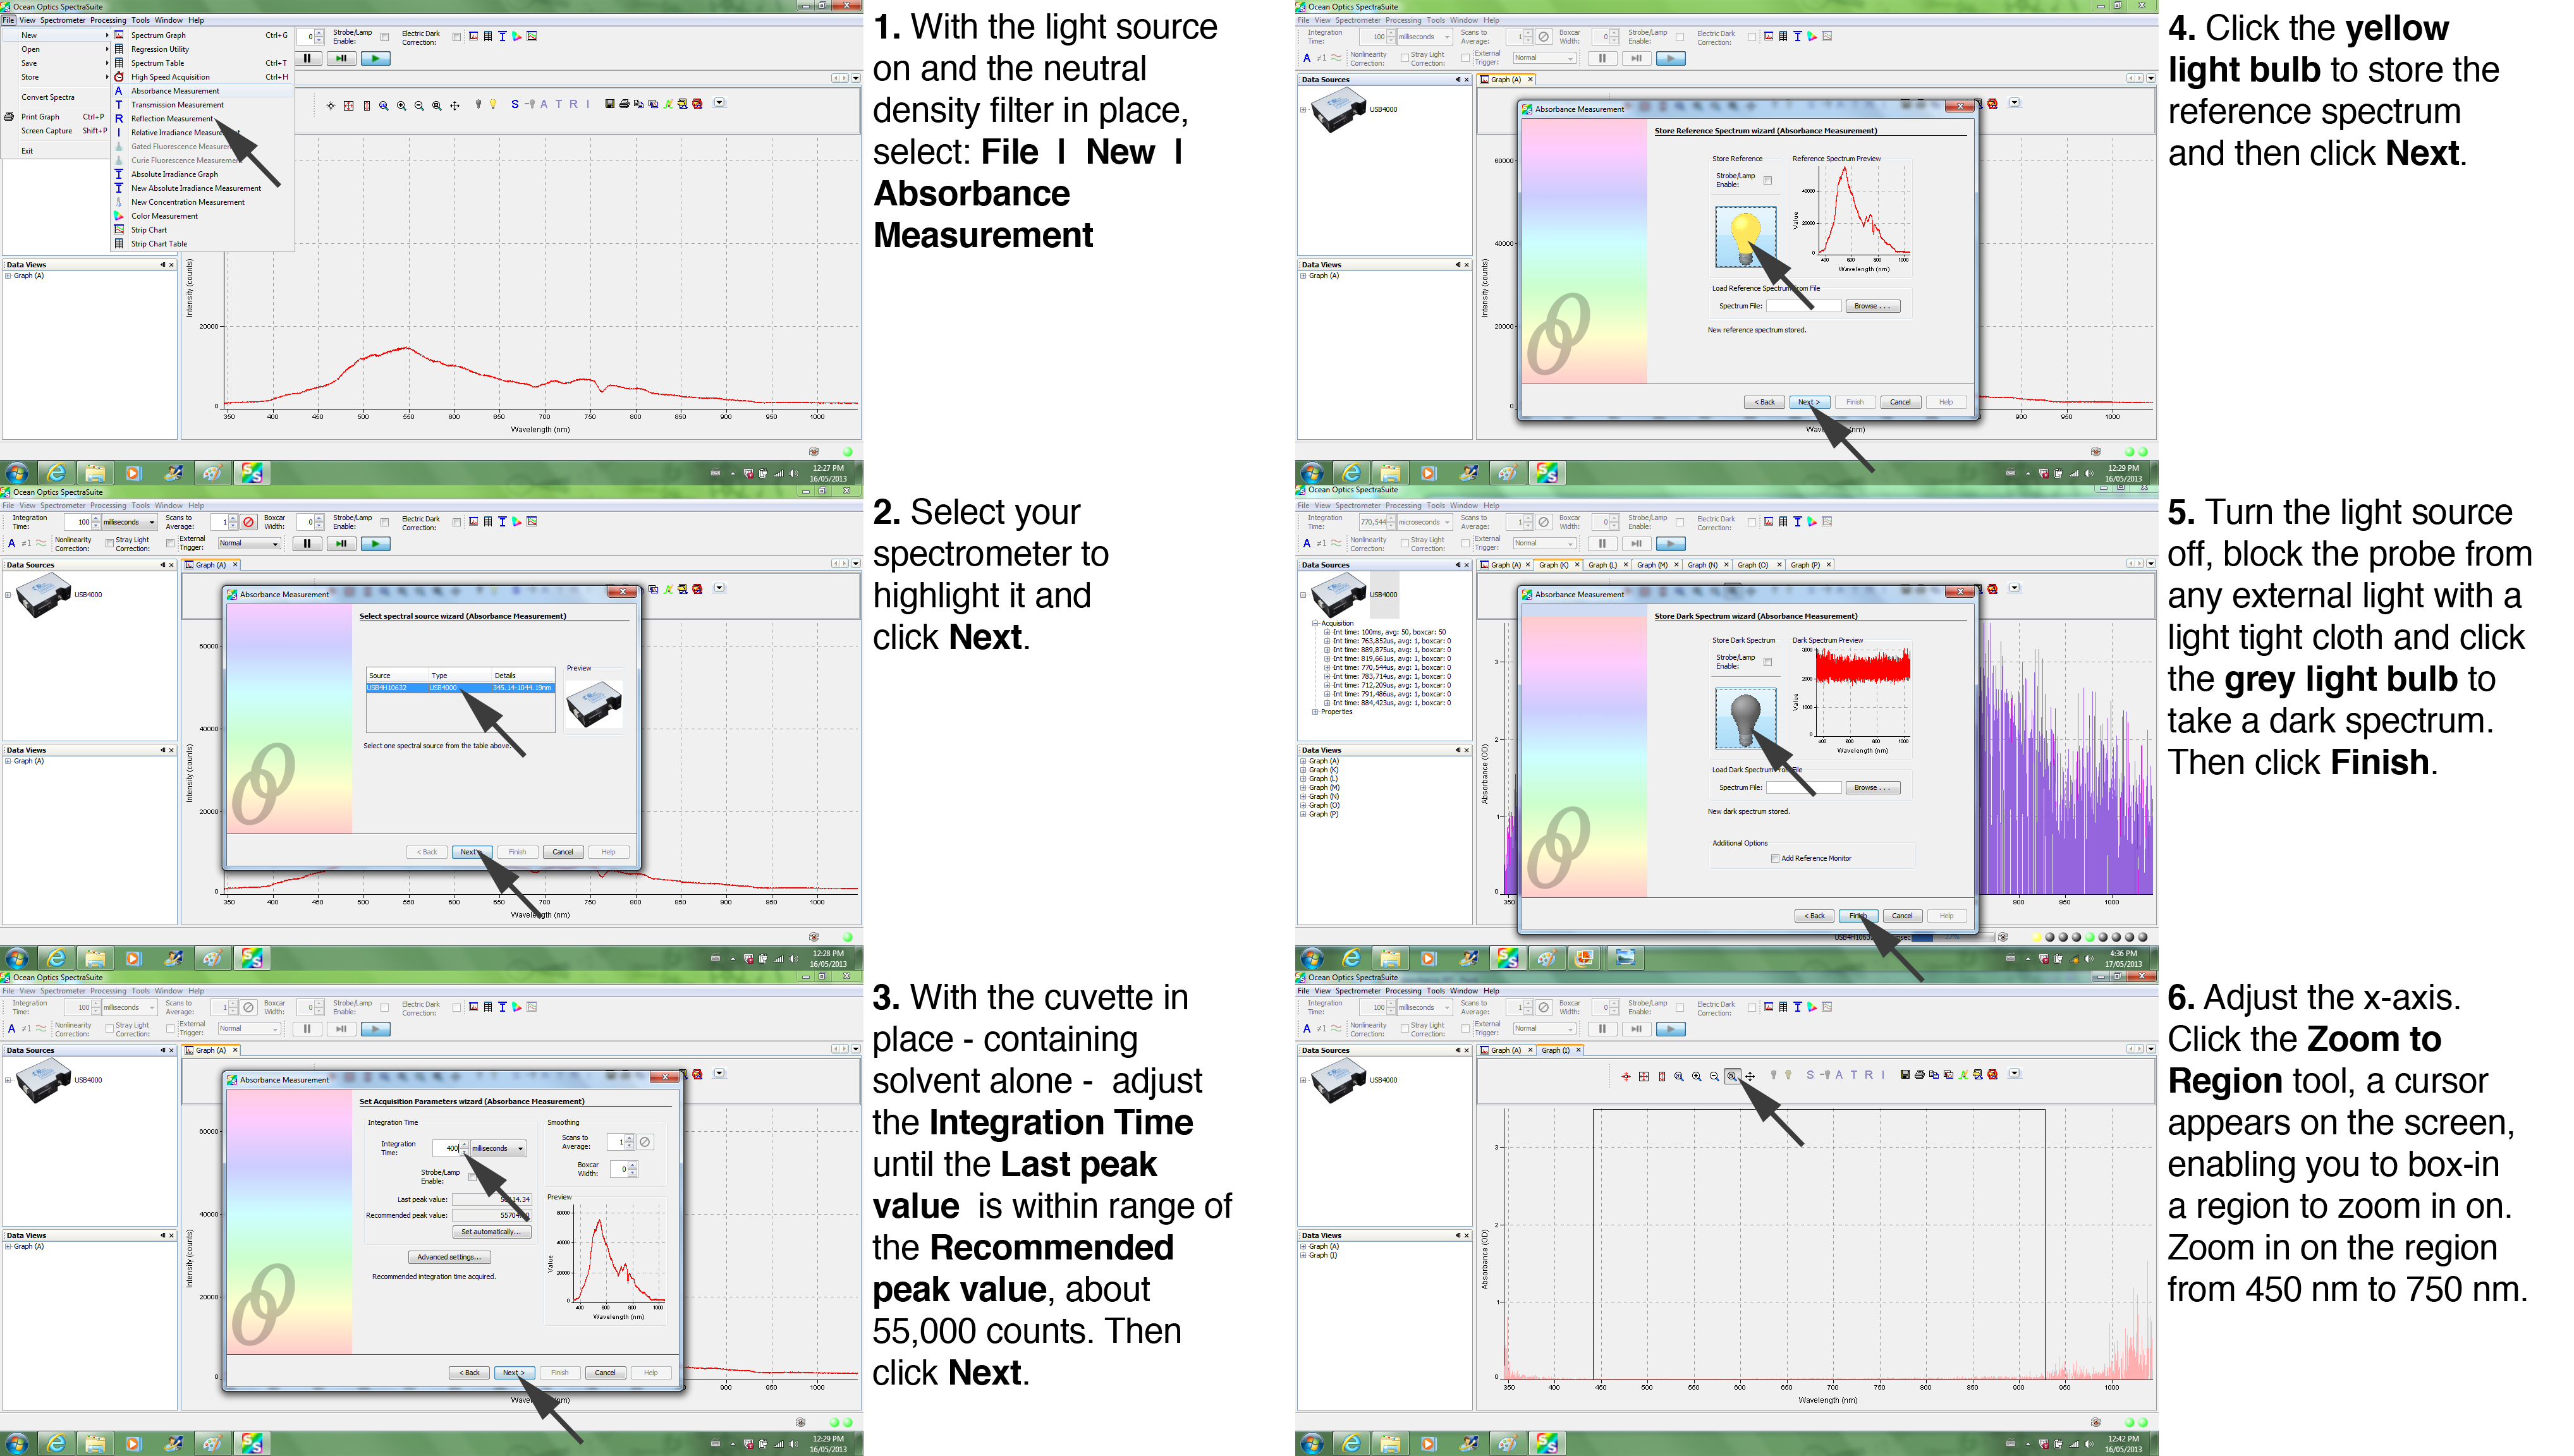 step-by-step screengrabs showing how to calibrate the SpectraSuite software